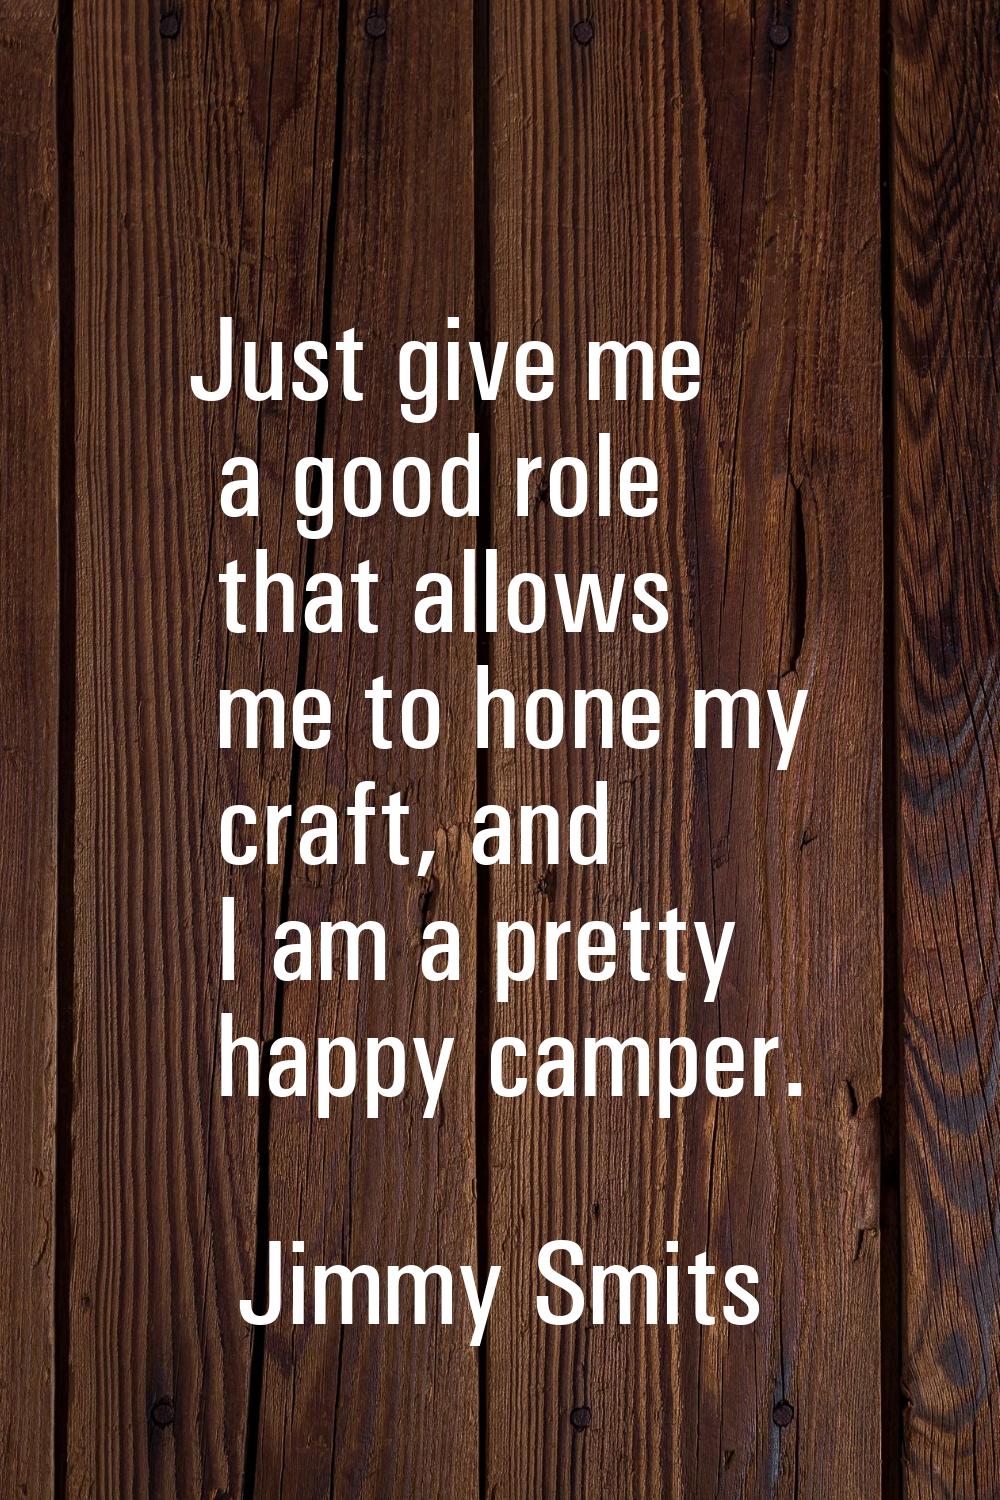 Just give me a good role that allows me to hone my craft, and I am a pretty happy camper.